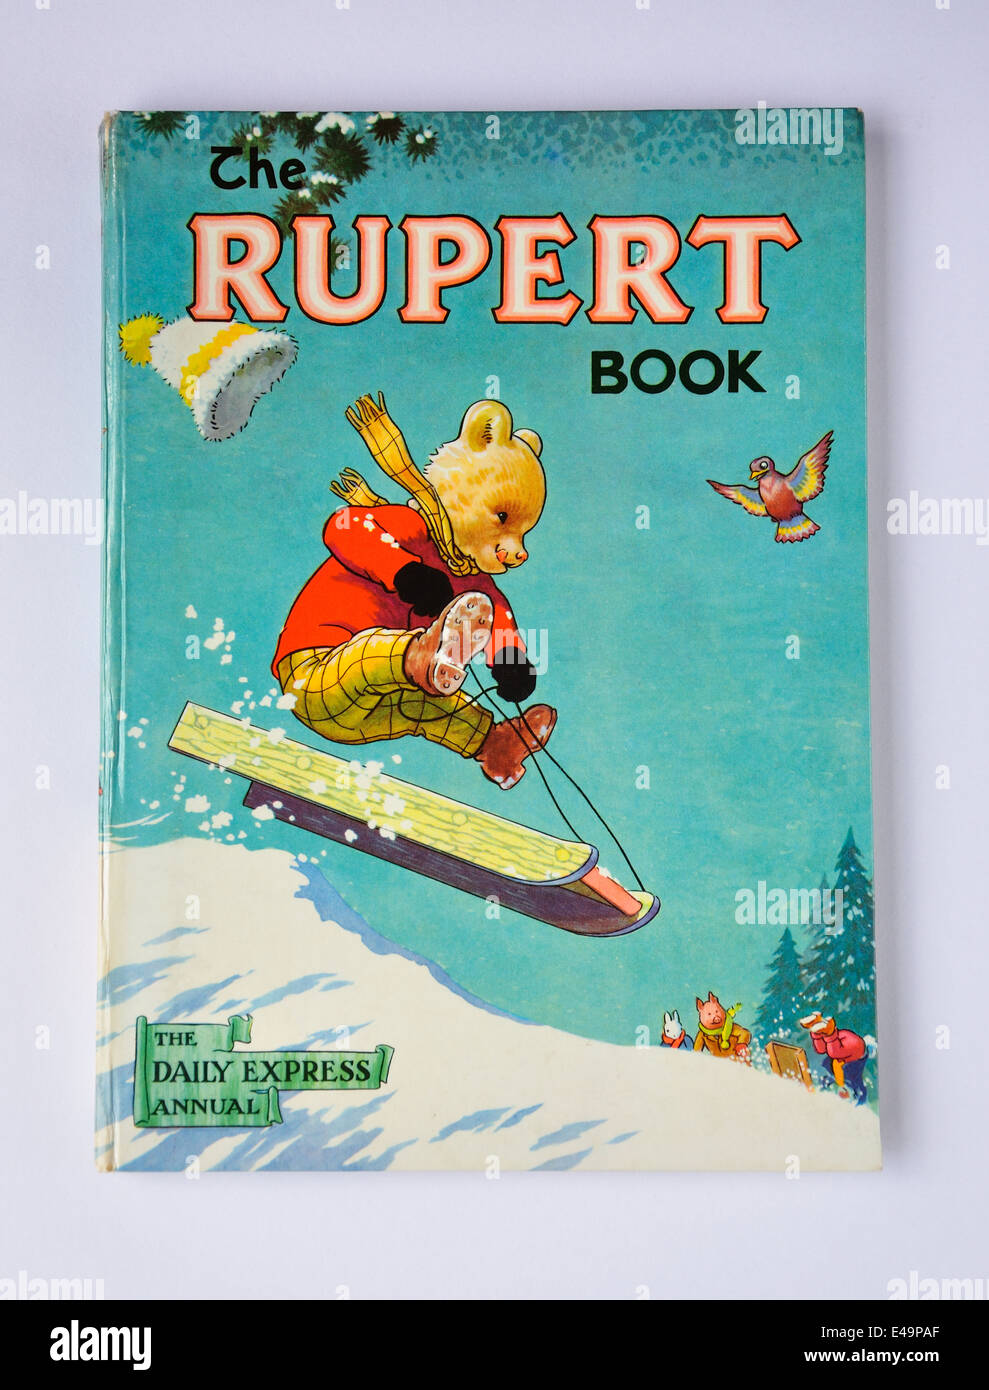 Daily Express Rupert Bear No21.1956 annuel, Surrey, Angleterre, Royaume-Uni Banque D'Images